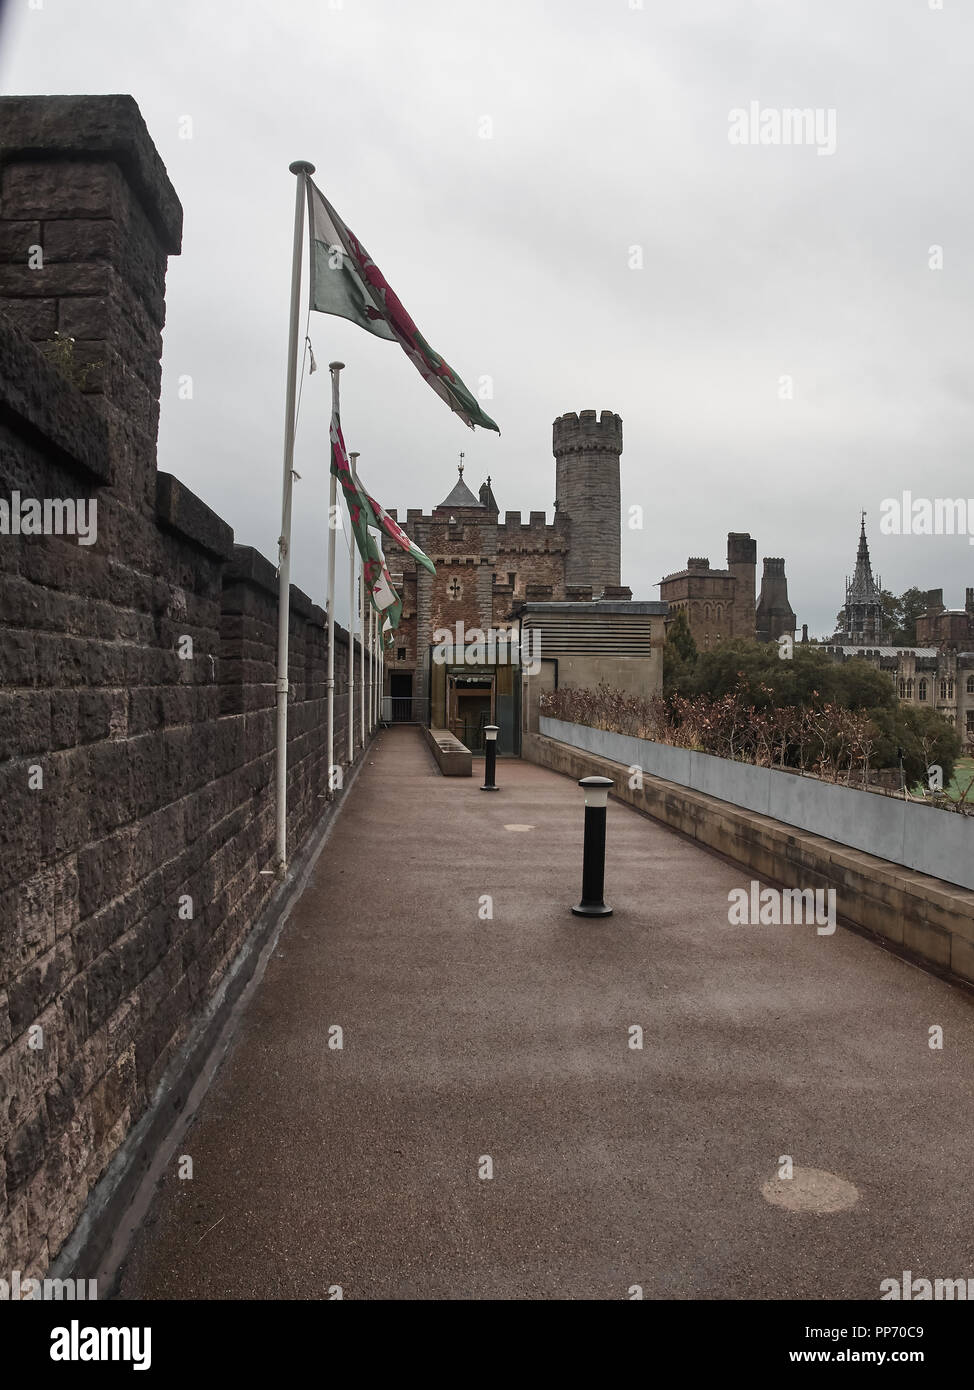 View of the walls of the castle of Cardiff from the inside Stock Photo